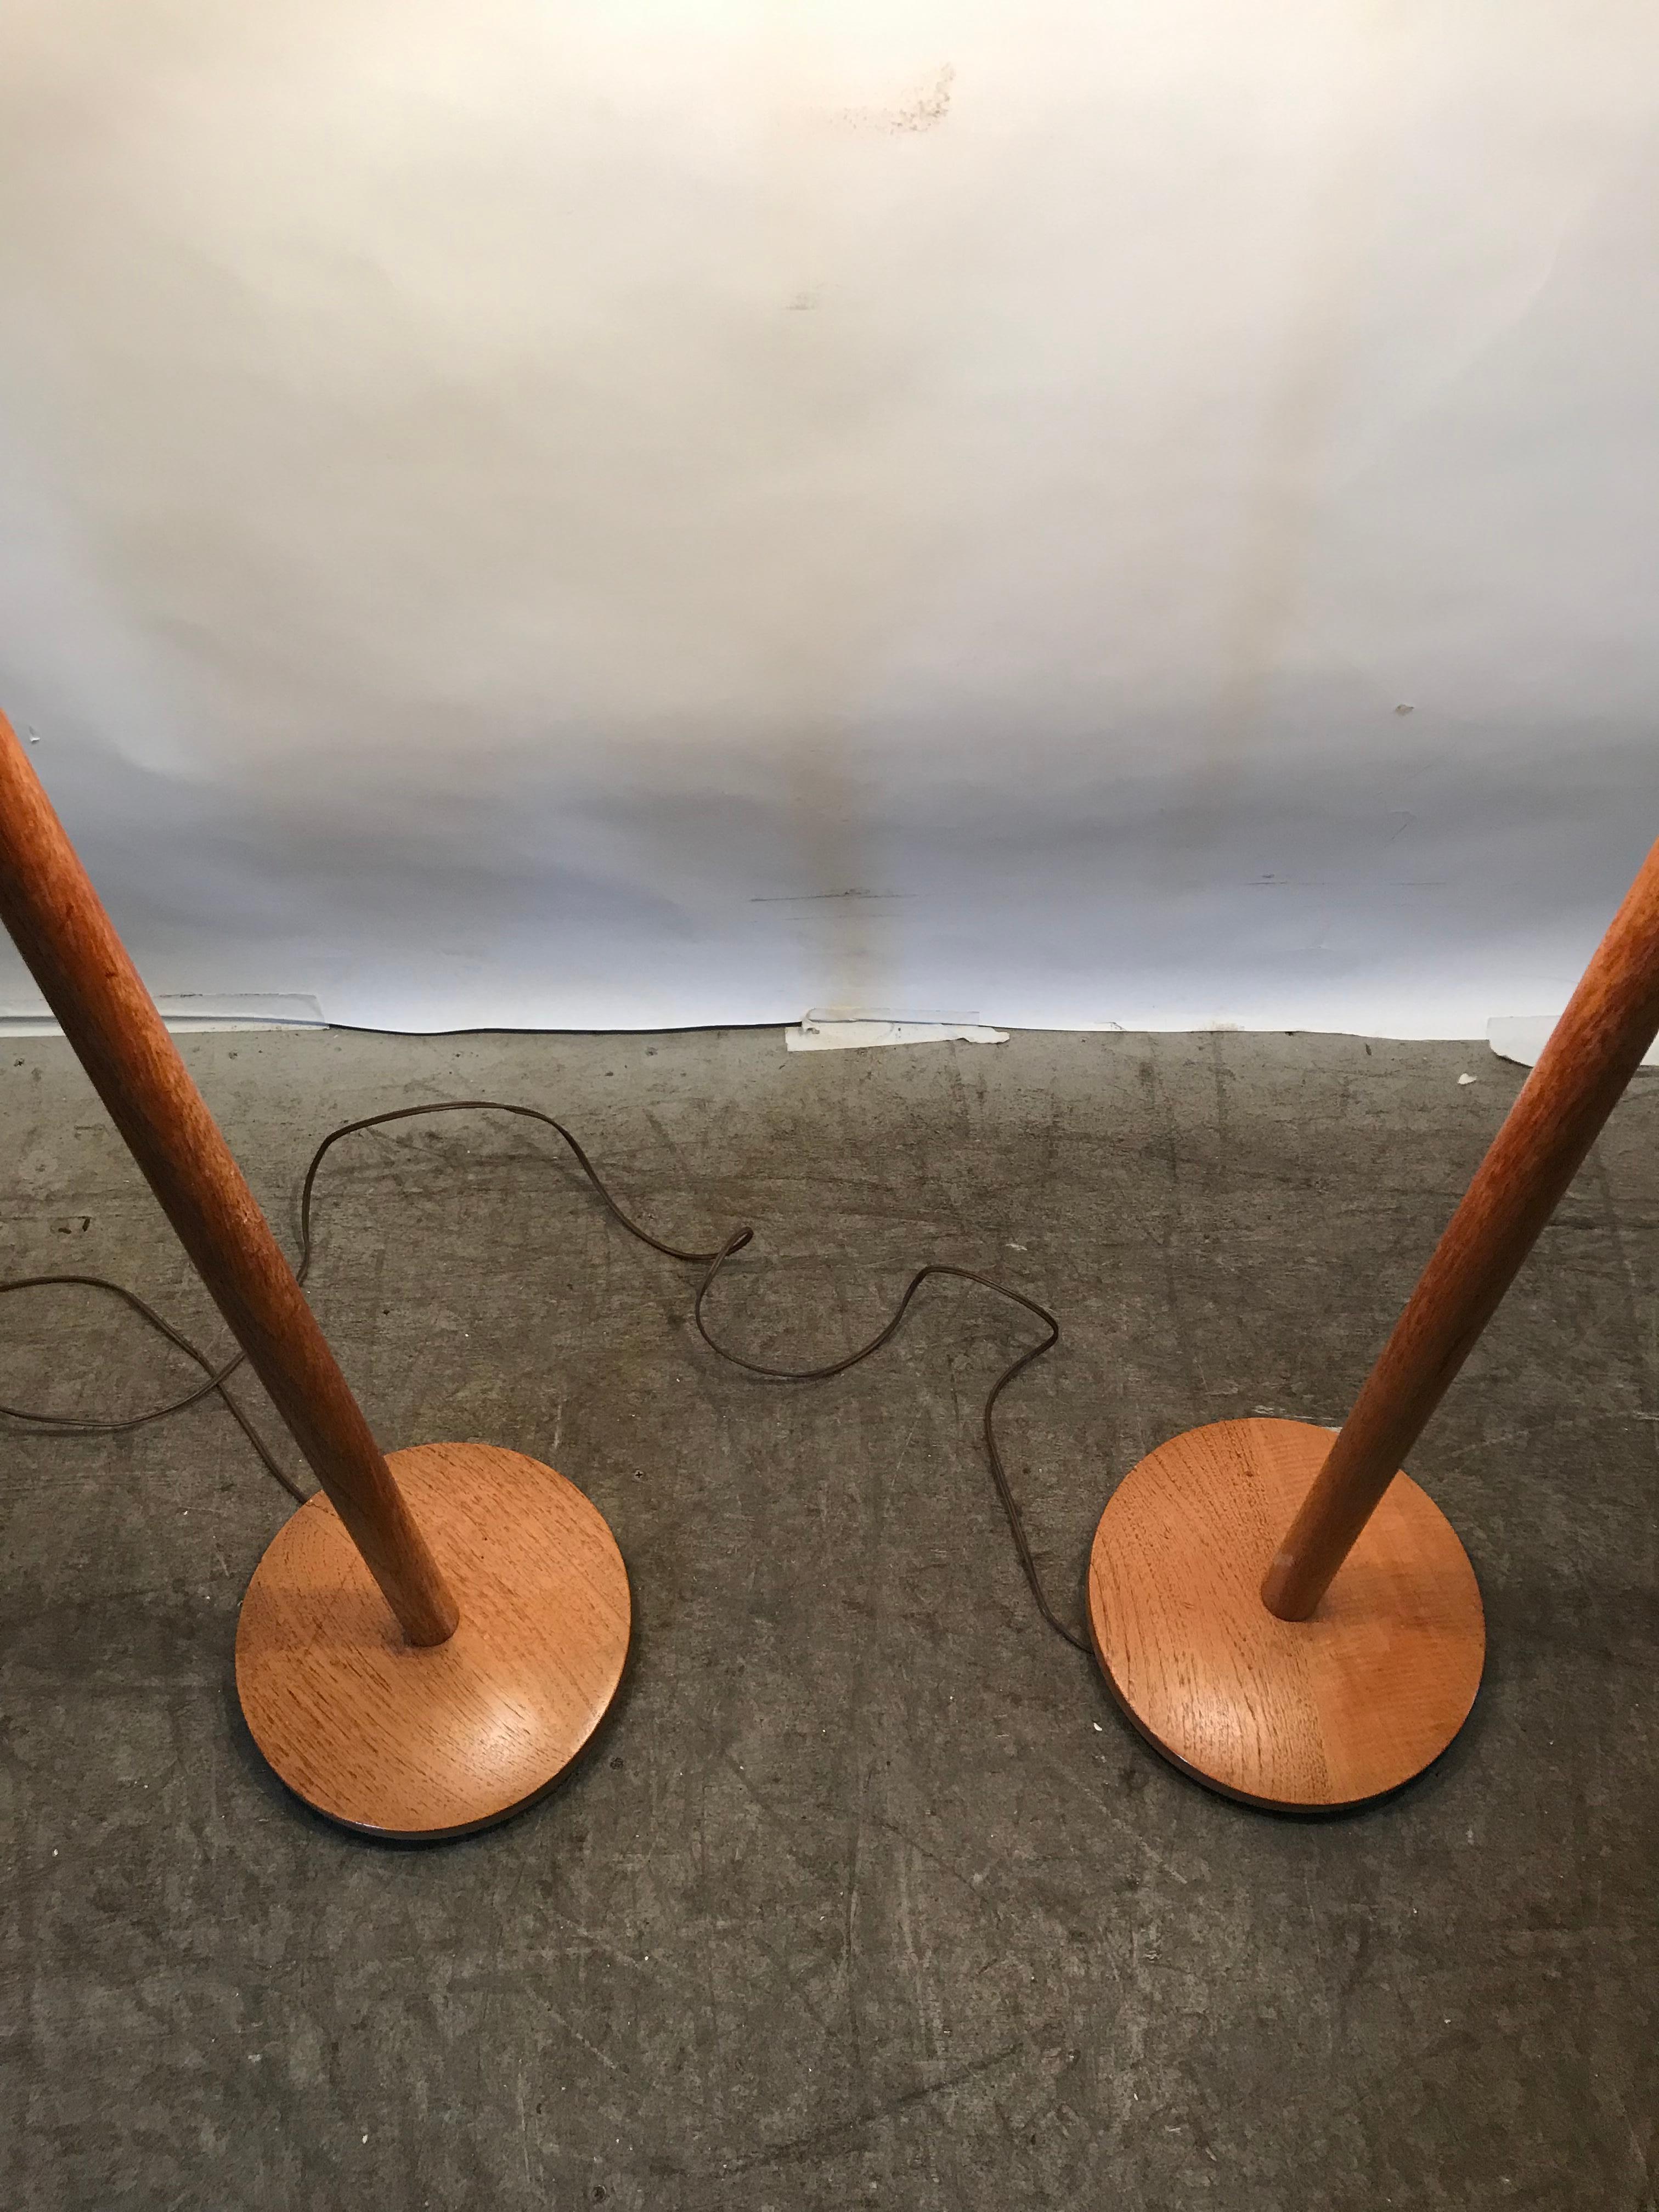 Matching pair of teak floor lamps attributed to Uno and Osten Kristiansson, Sweden, 1950. Nice original condition, retains original lamp shades.